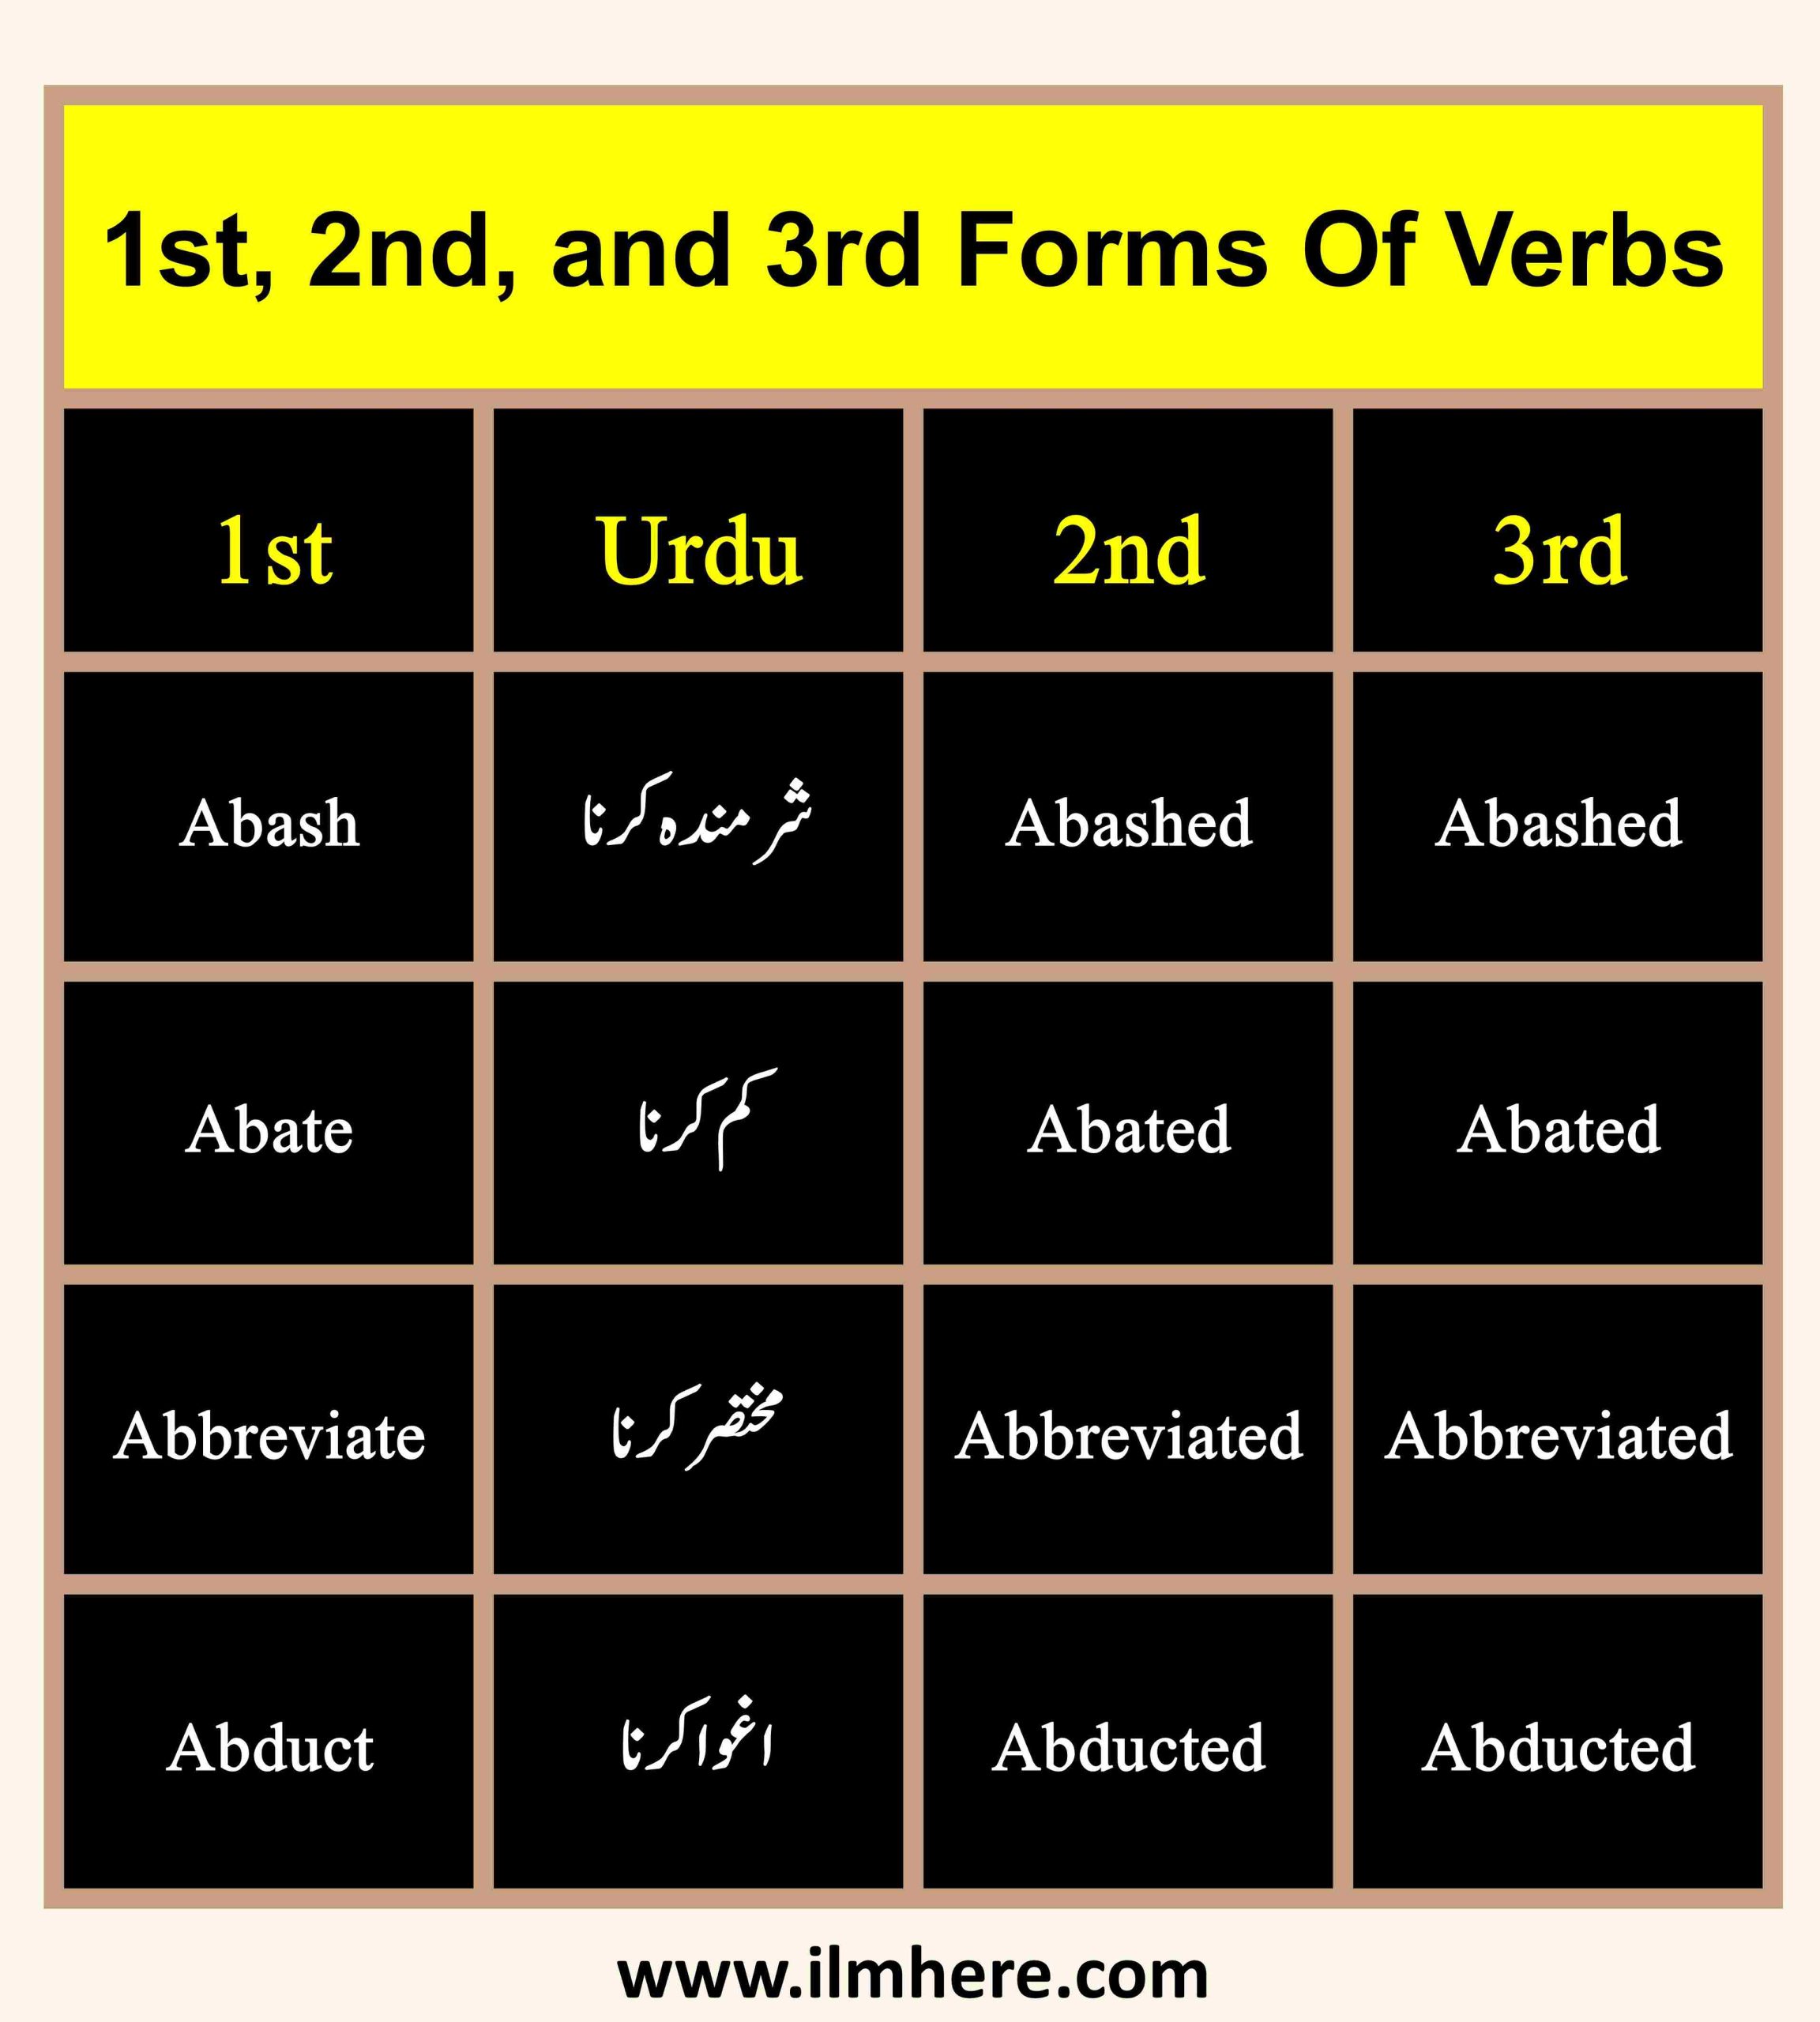 1st, 2nd, and 3rd Forms Of Verbs